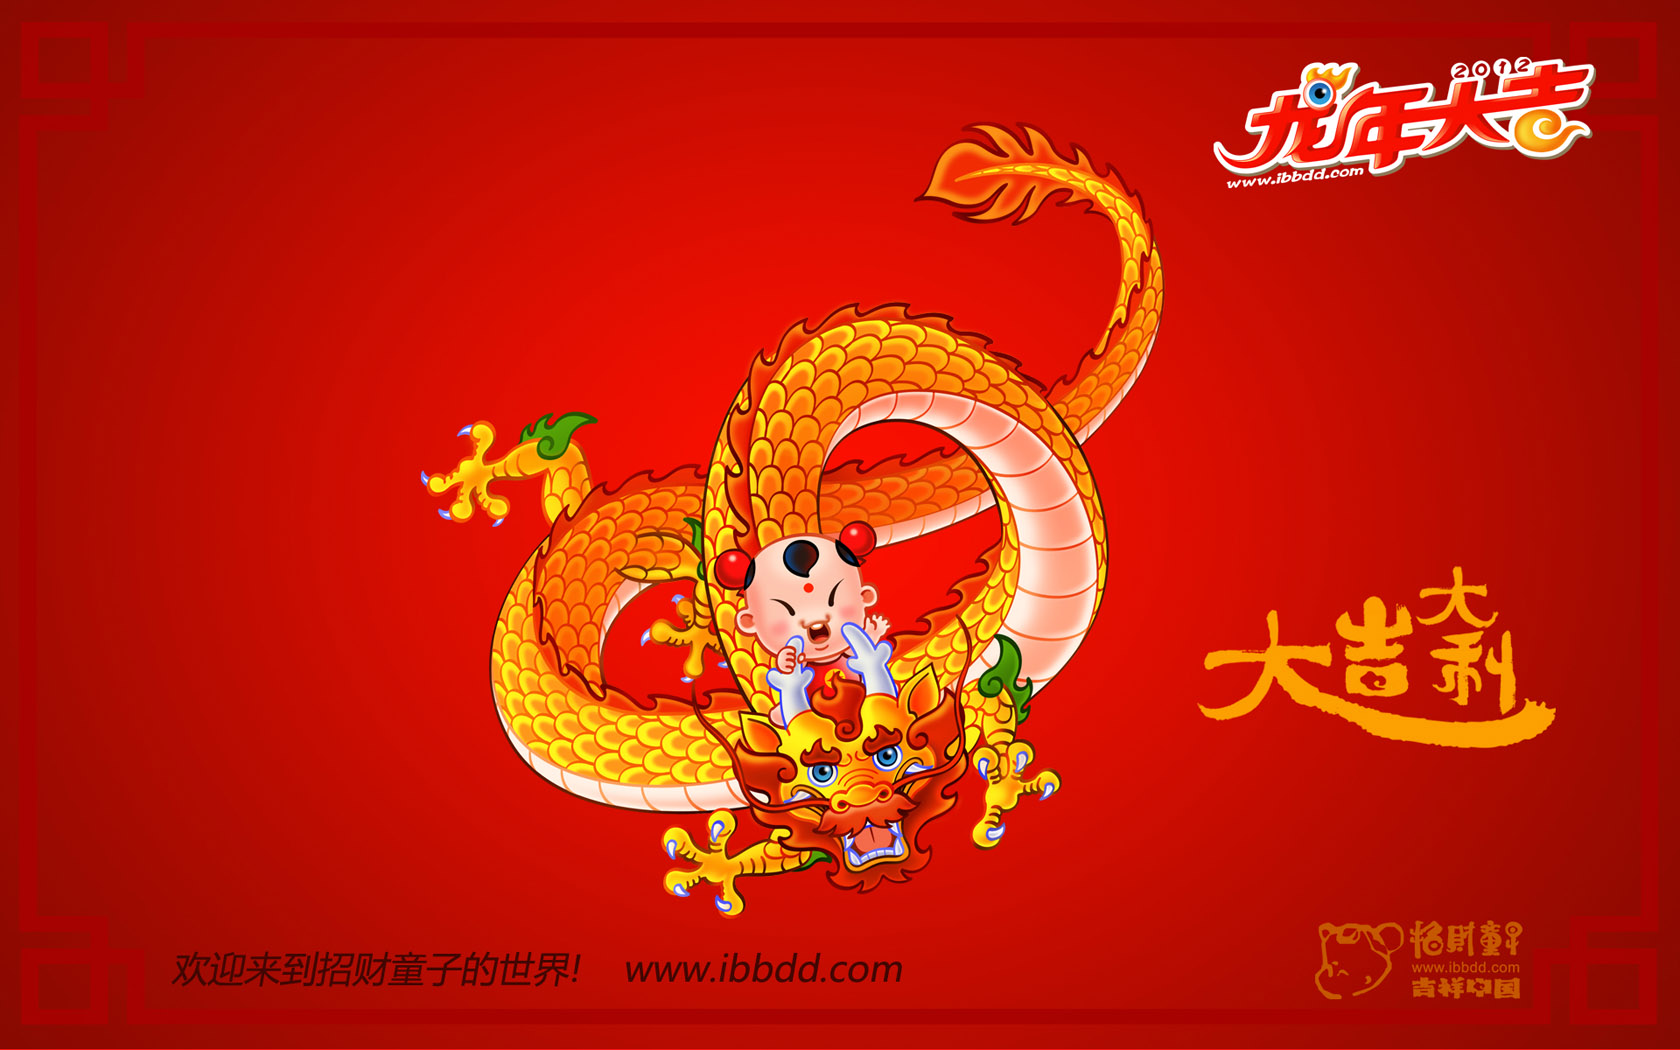 Lucky Boy 2012 Year of the Dragon Red Festive Desktop Background